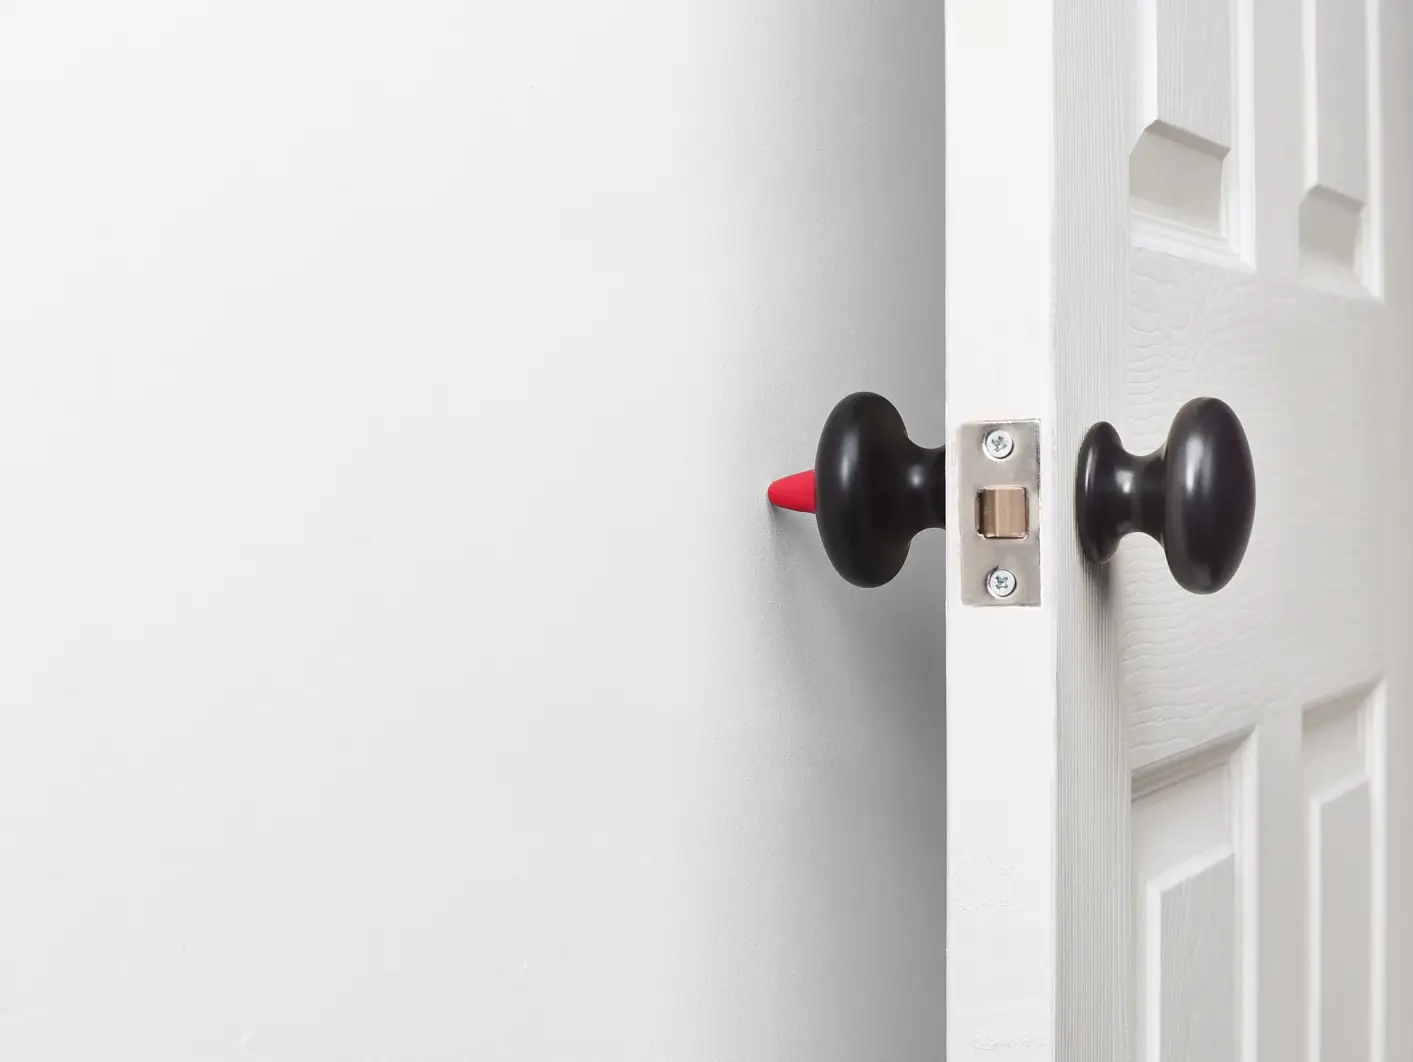 Sugru® can also be used as a door stopper and protect the wall from scratches and dents.